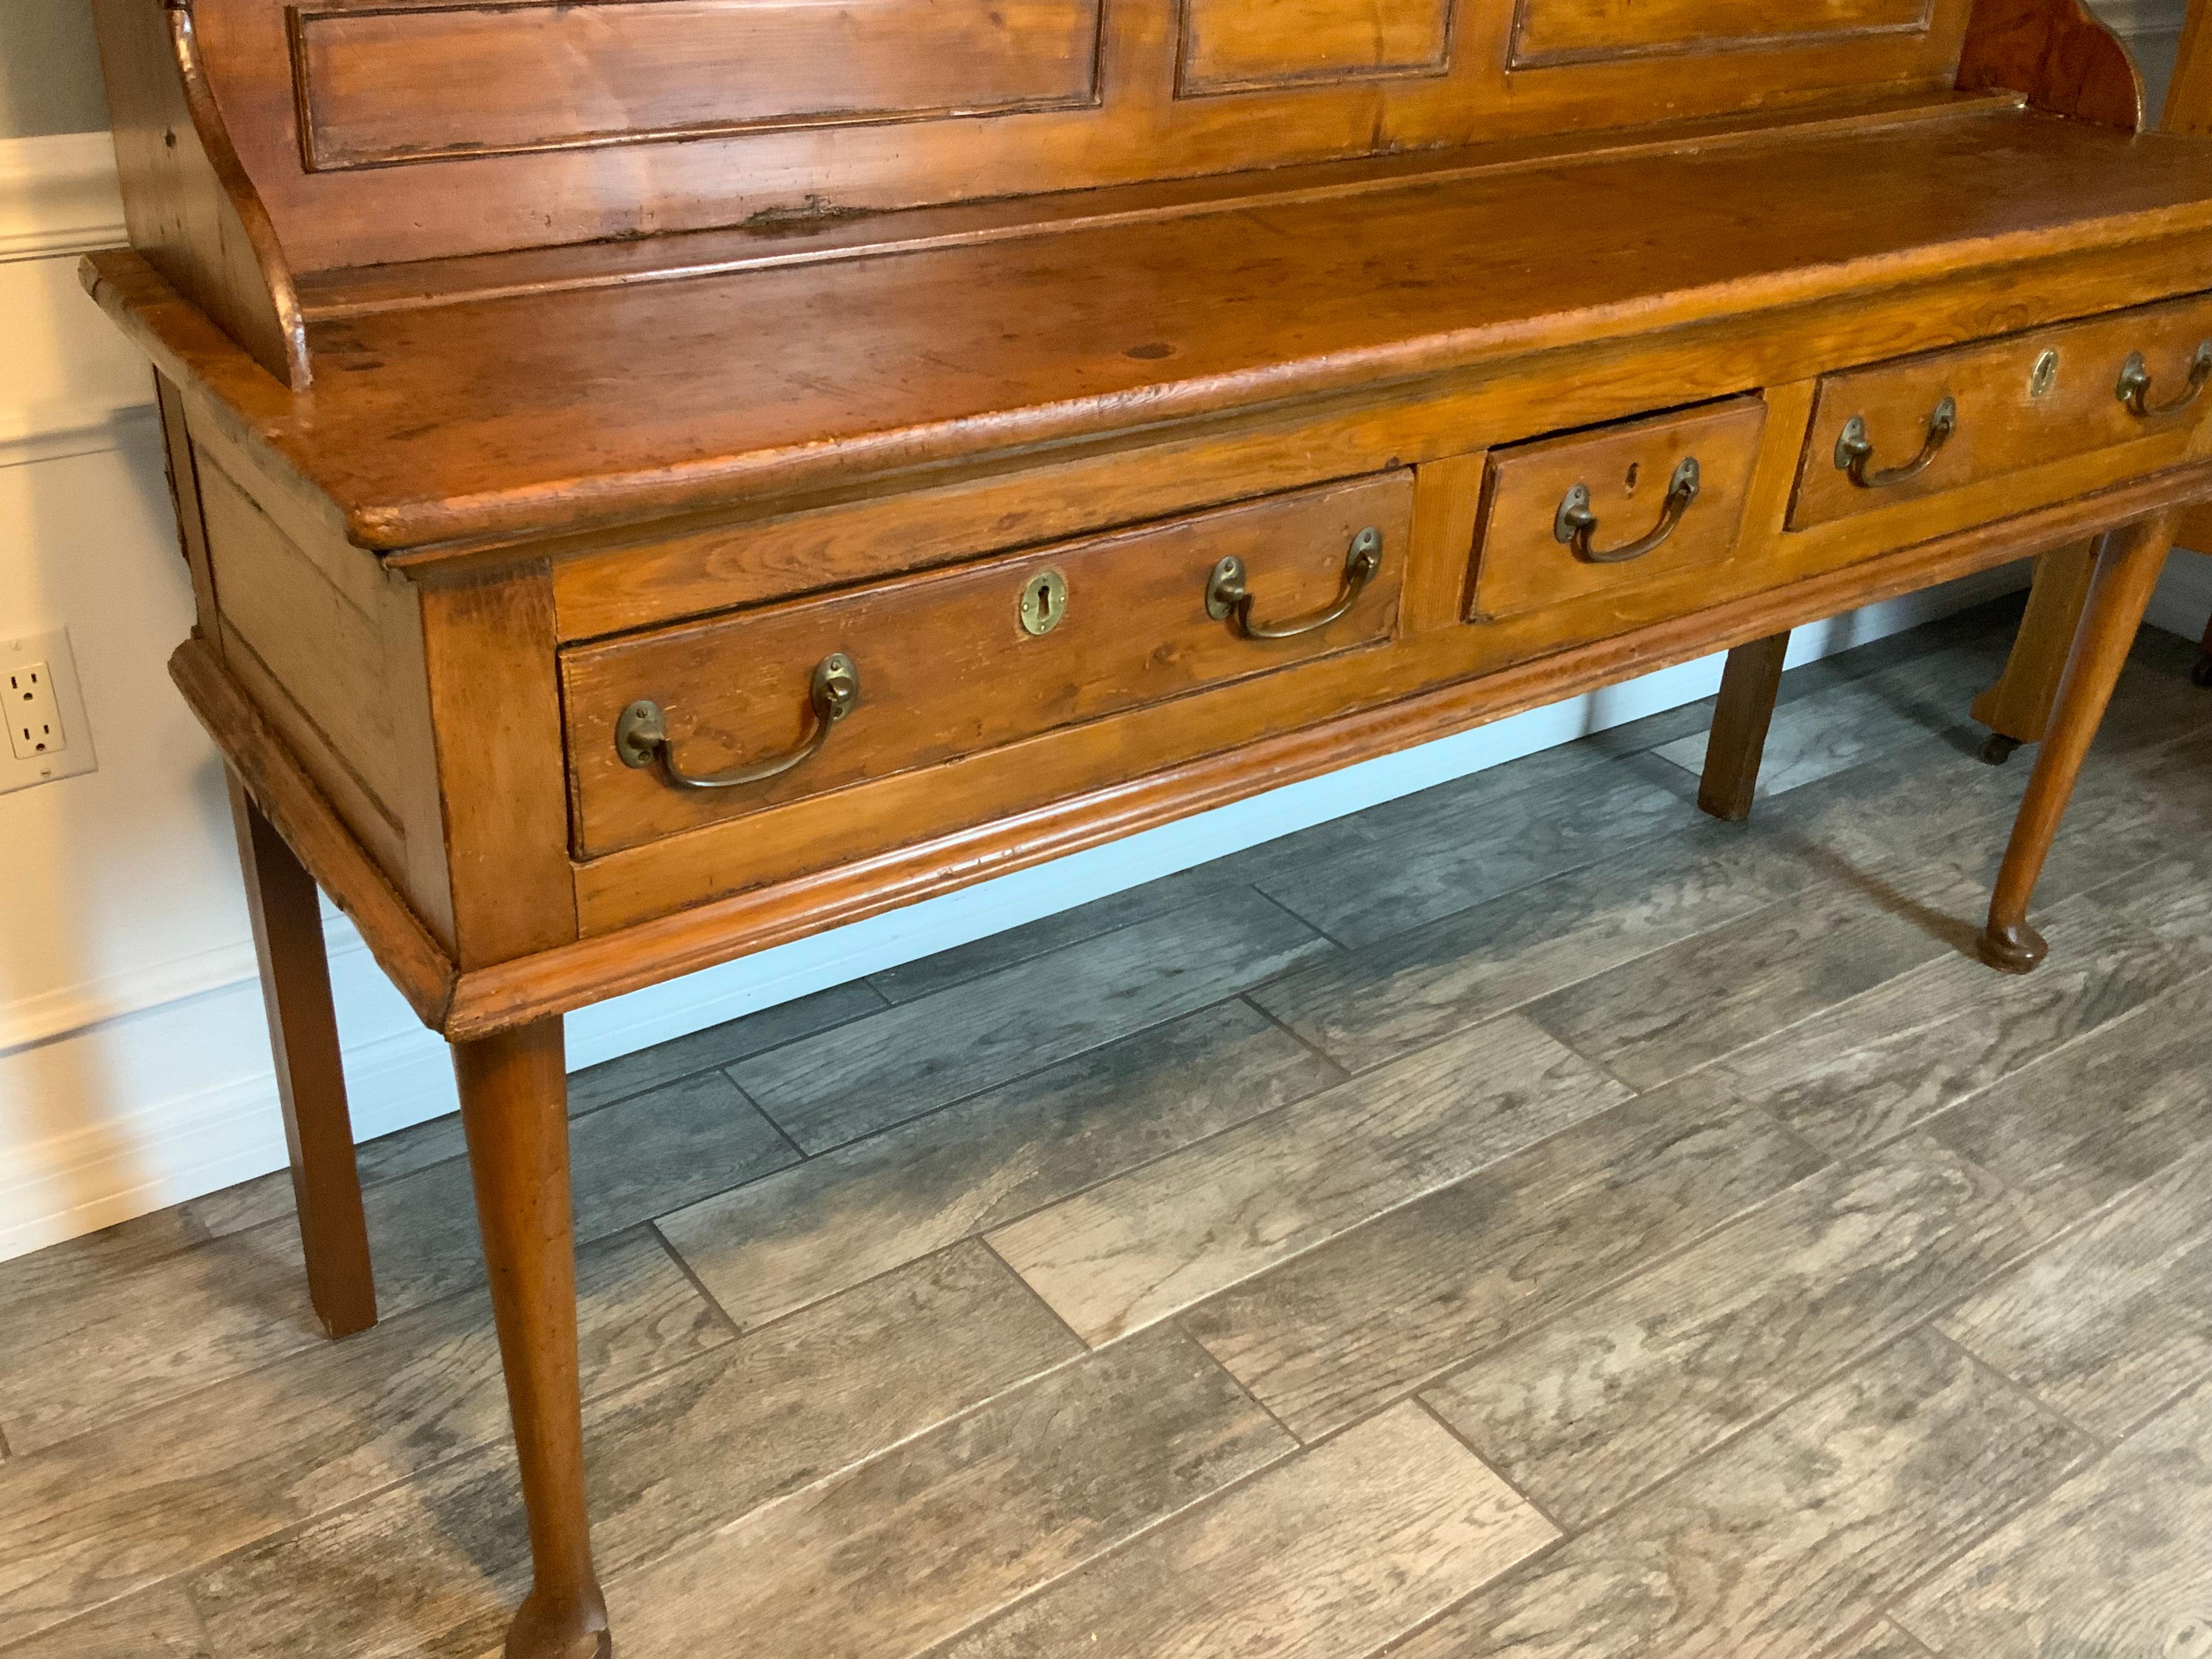  Very attractive two piece mid 18th century Pine Welsh Dresser.  Could very well be Colonial New England made 1740-50.  Original hardware and drawer locks intact.   Very good condition with an excellent color and aged patina to the old refinish. 